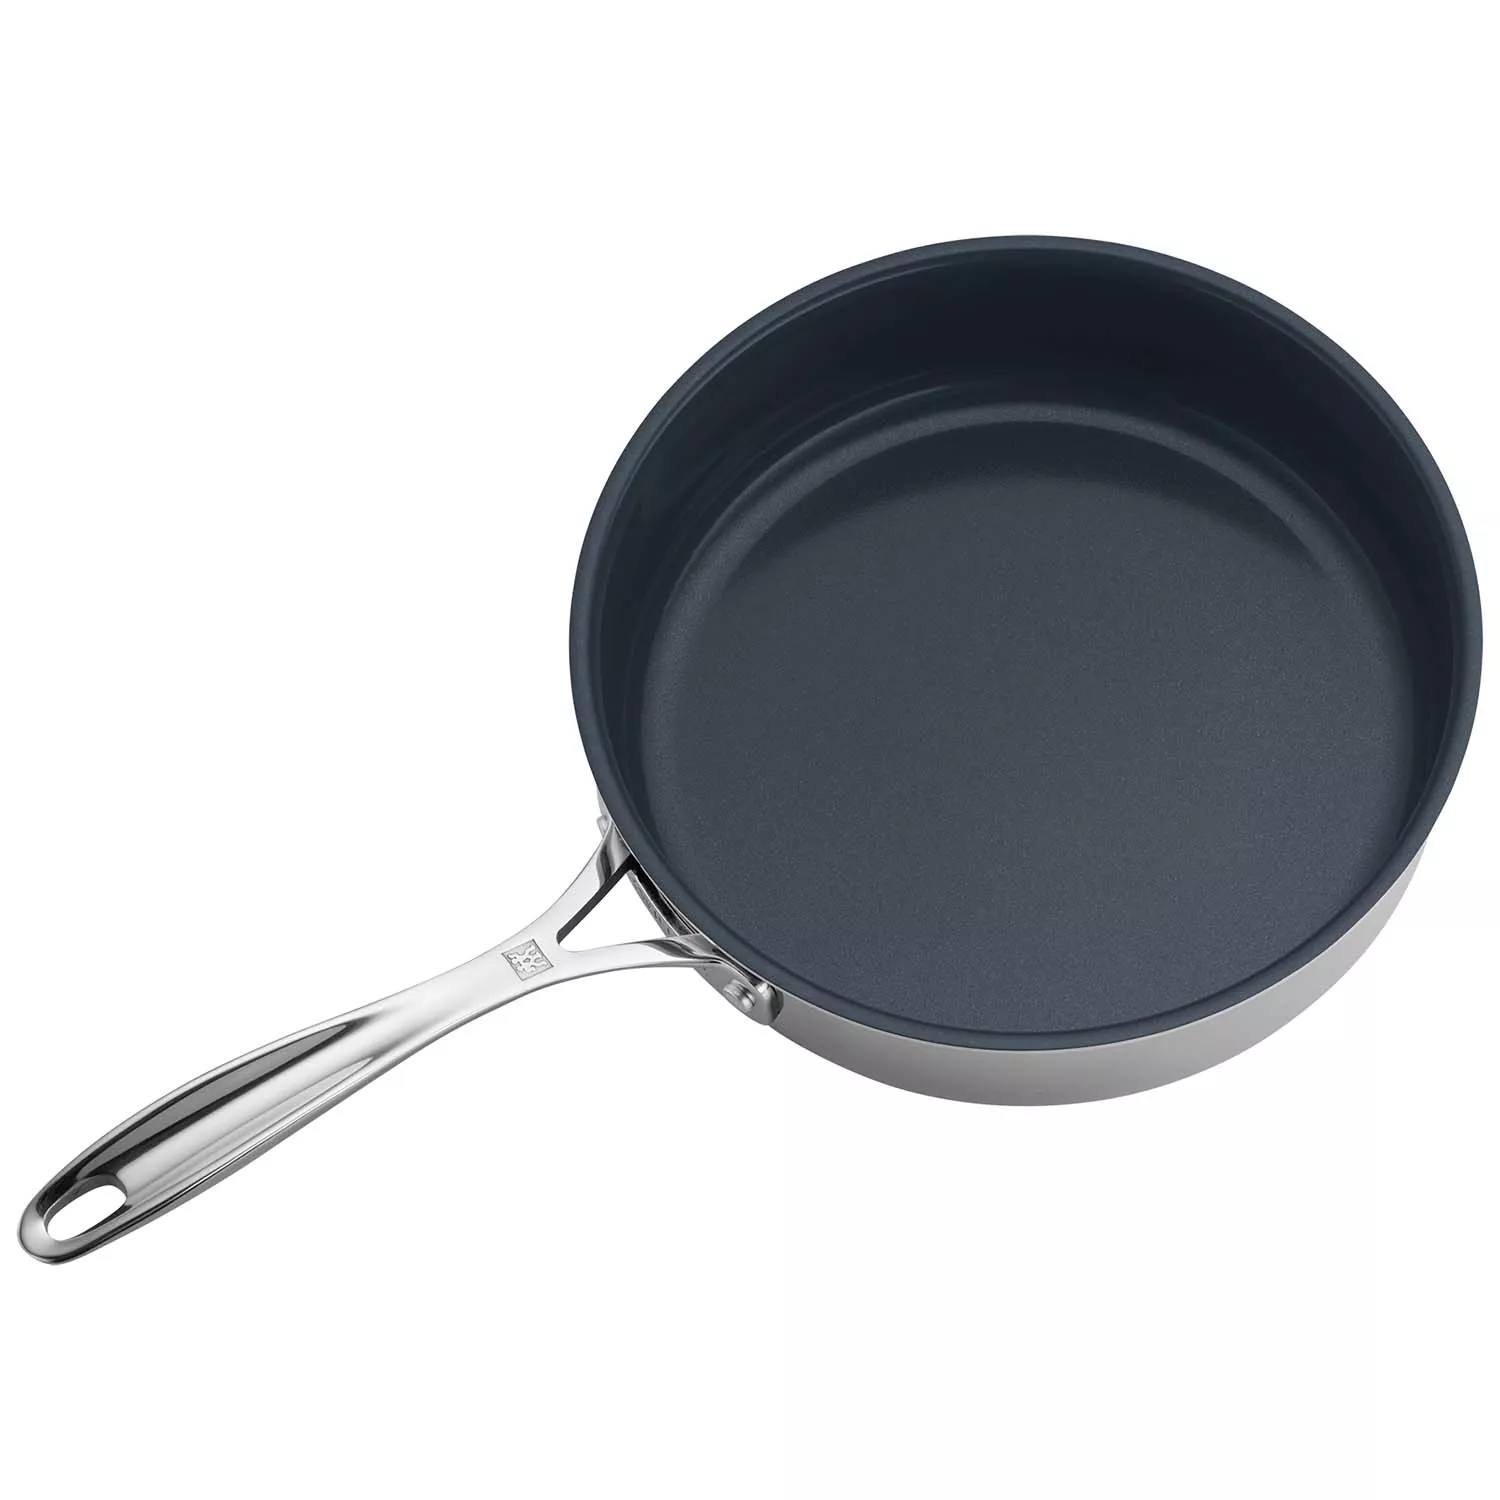 Zwilling JA Henckels 3 qt. Stainless Steel Saute Pan with Lid & Reviews